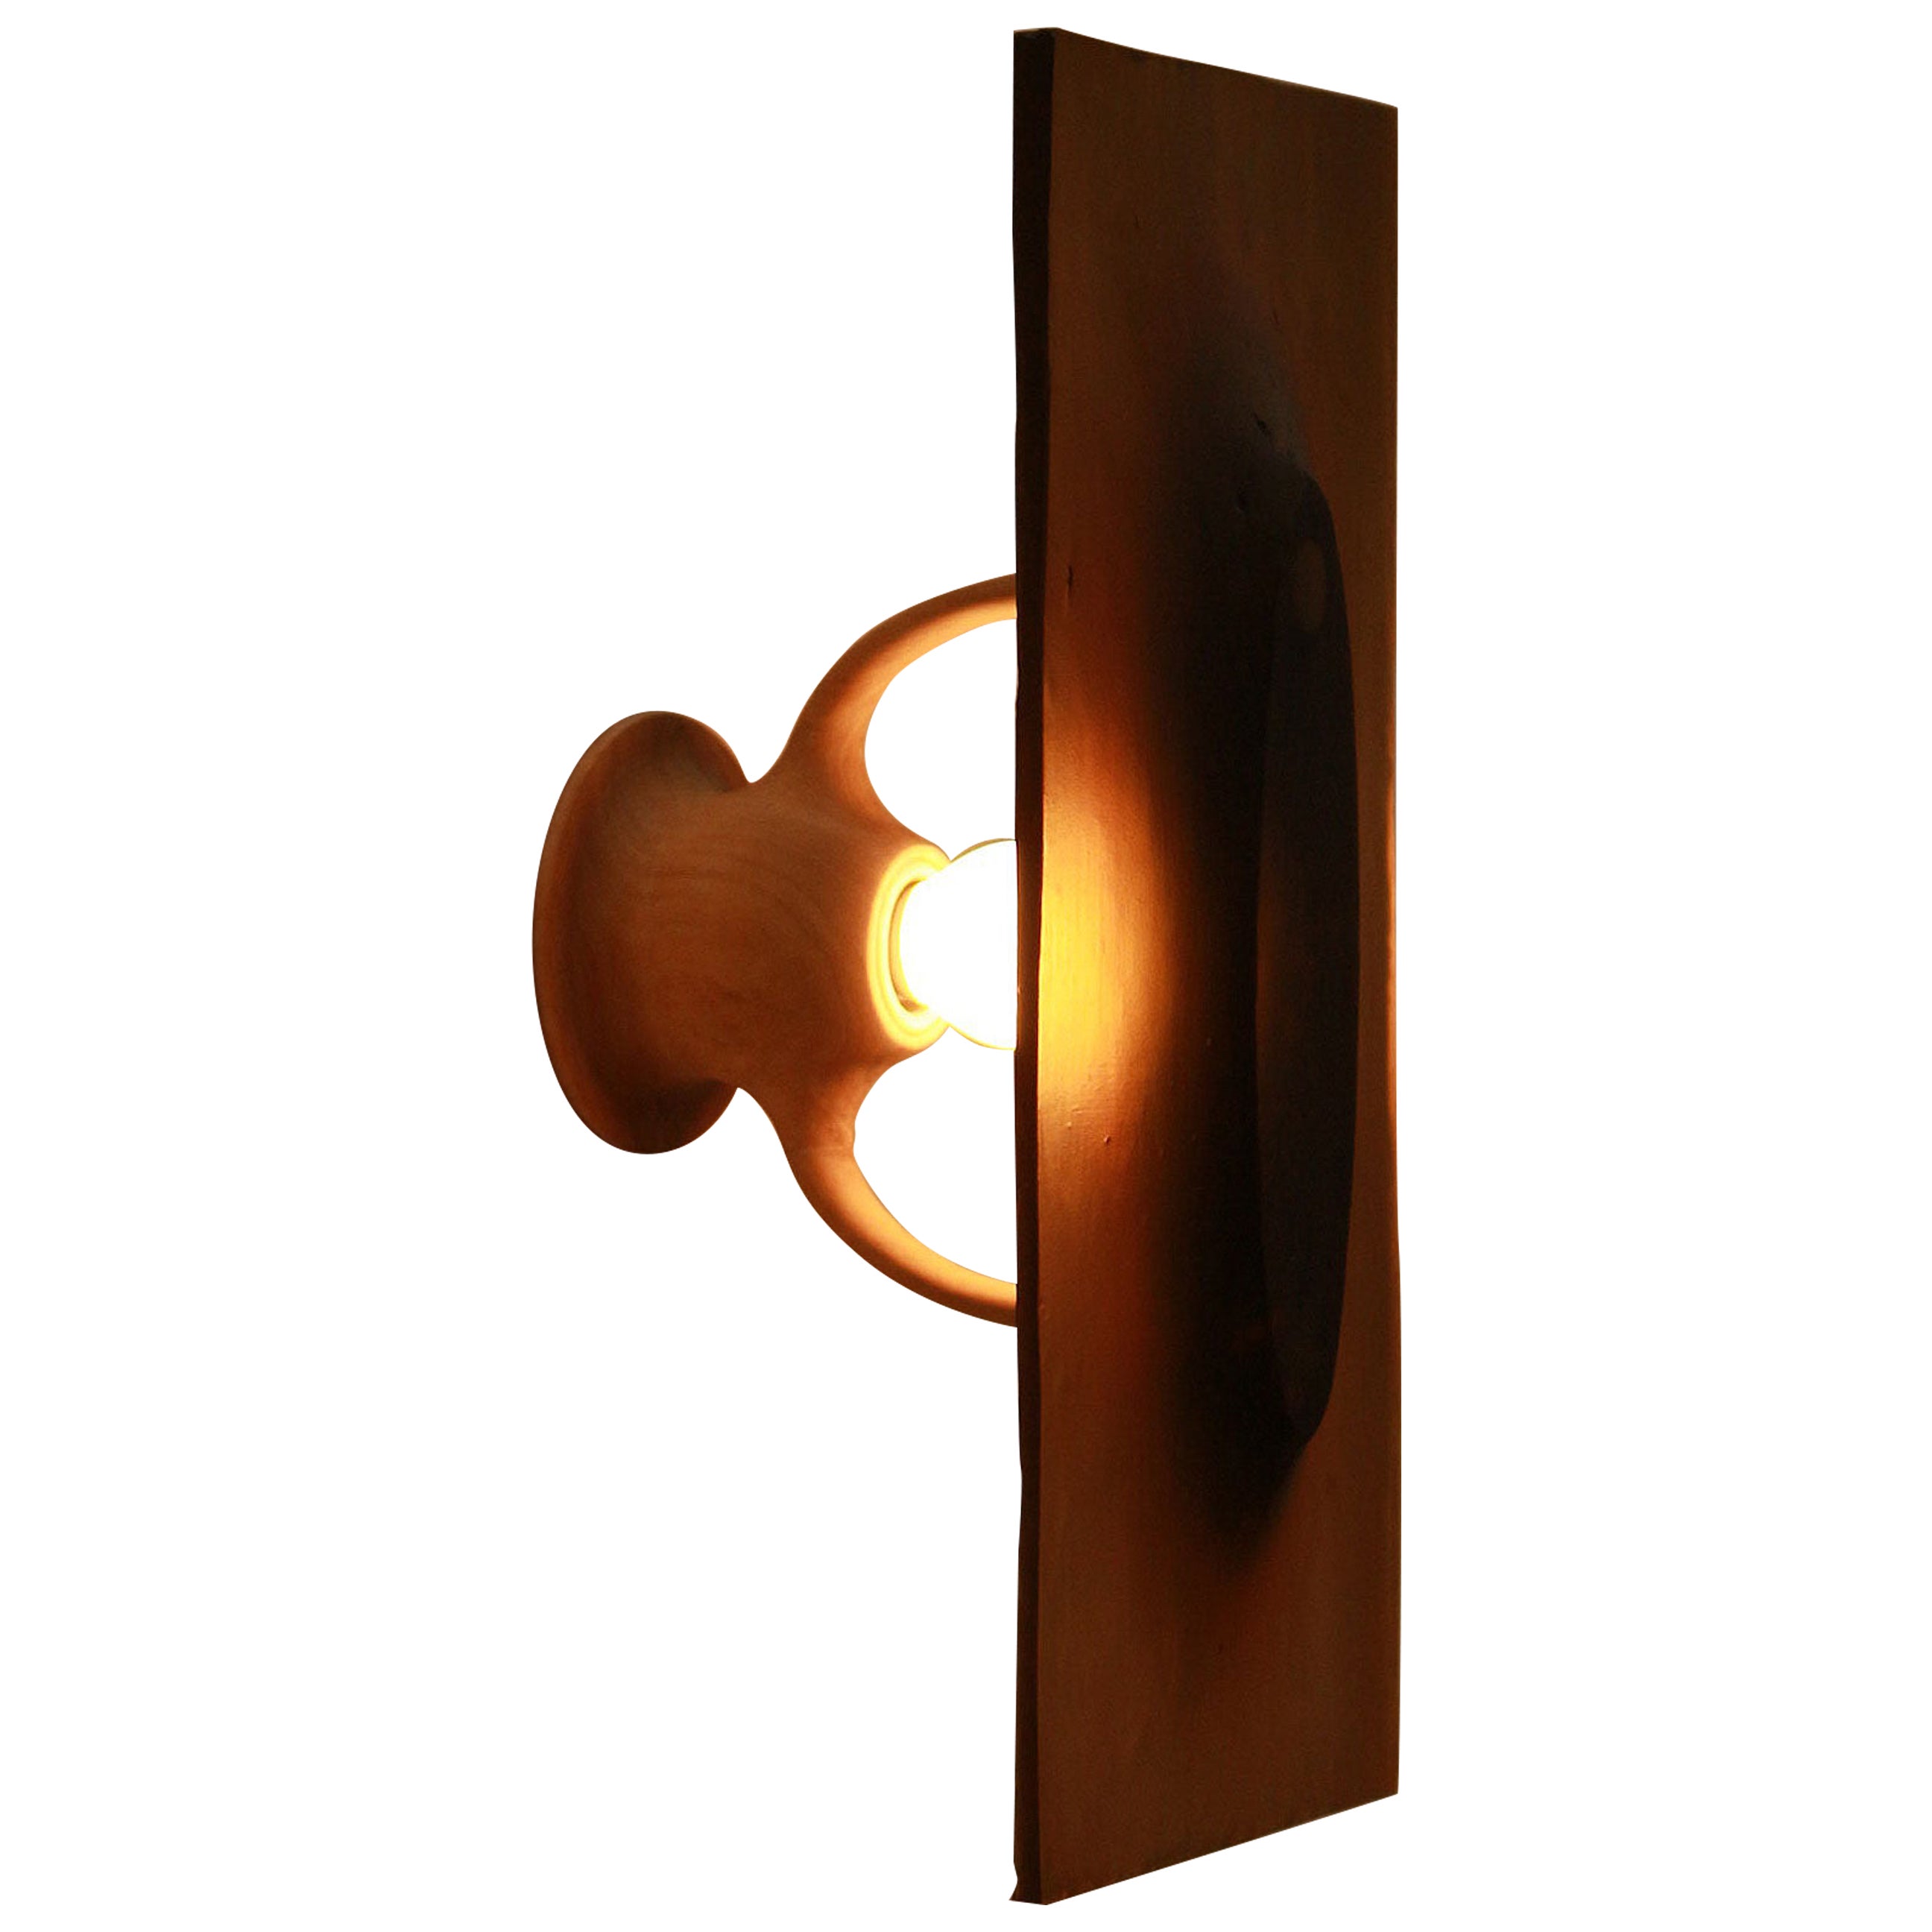 Satellite Collection - Curva Wall Lamp by Pedro Ávila